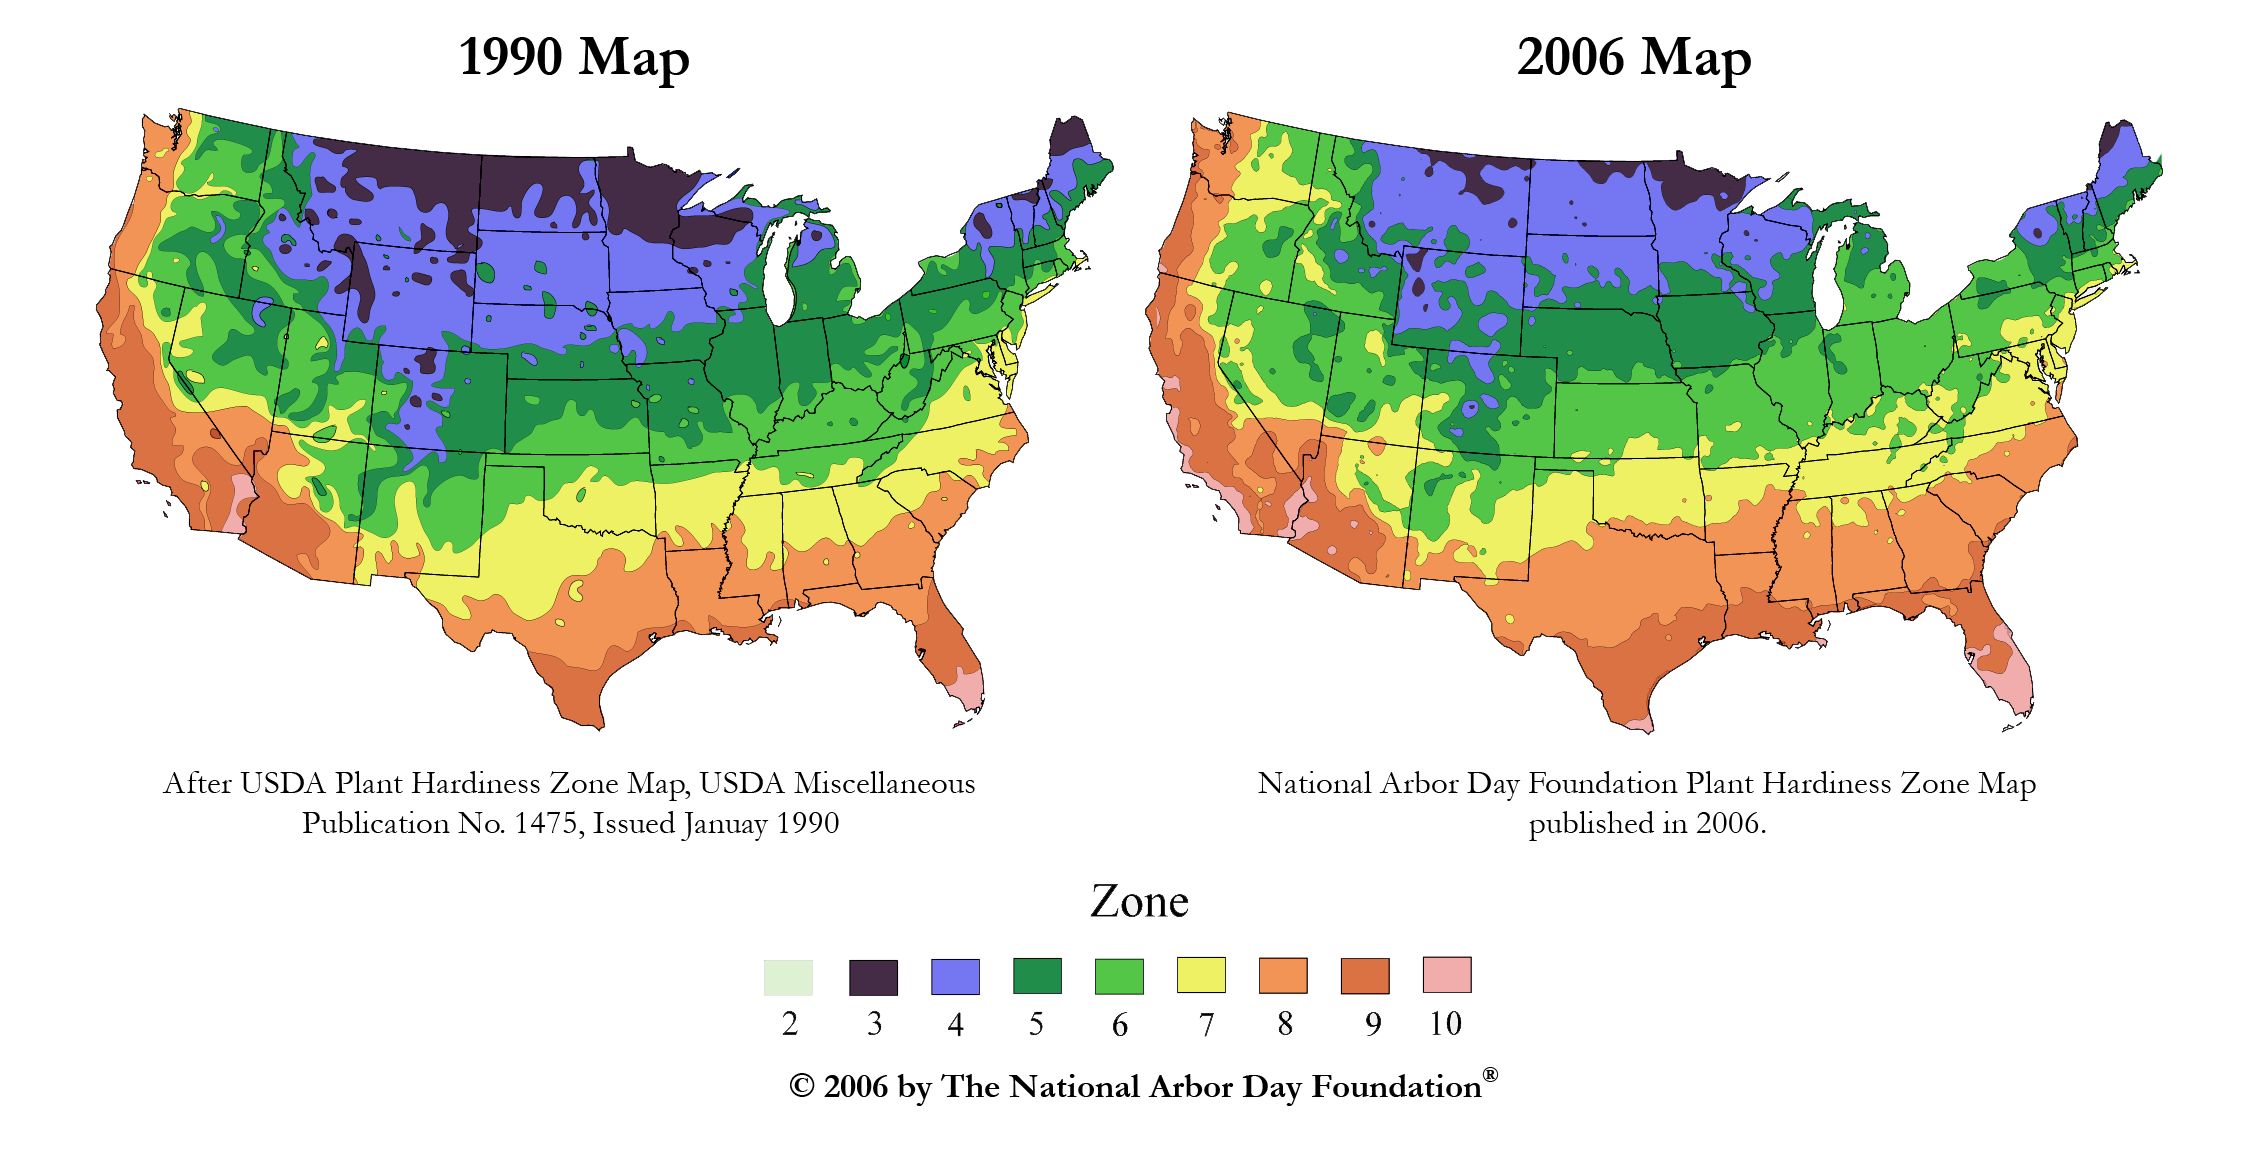 These plant hardiness zone maps show zonal shirfts due to warming temperatures. The zonal shirfts are approximations, so comparisons are for display purposes only. Click for larger map.